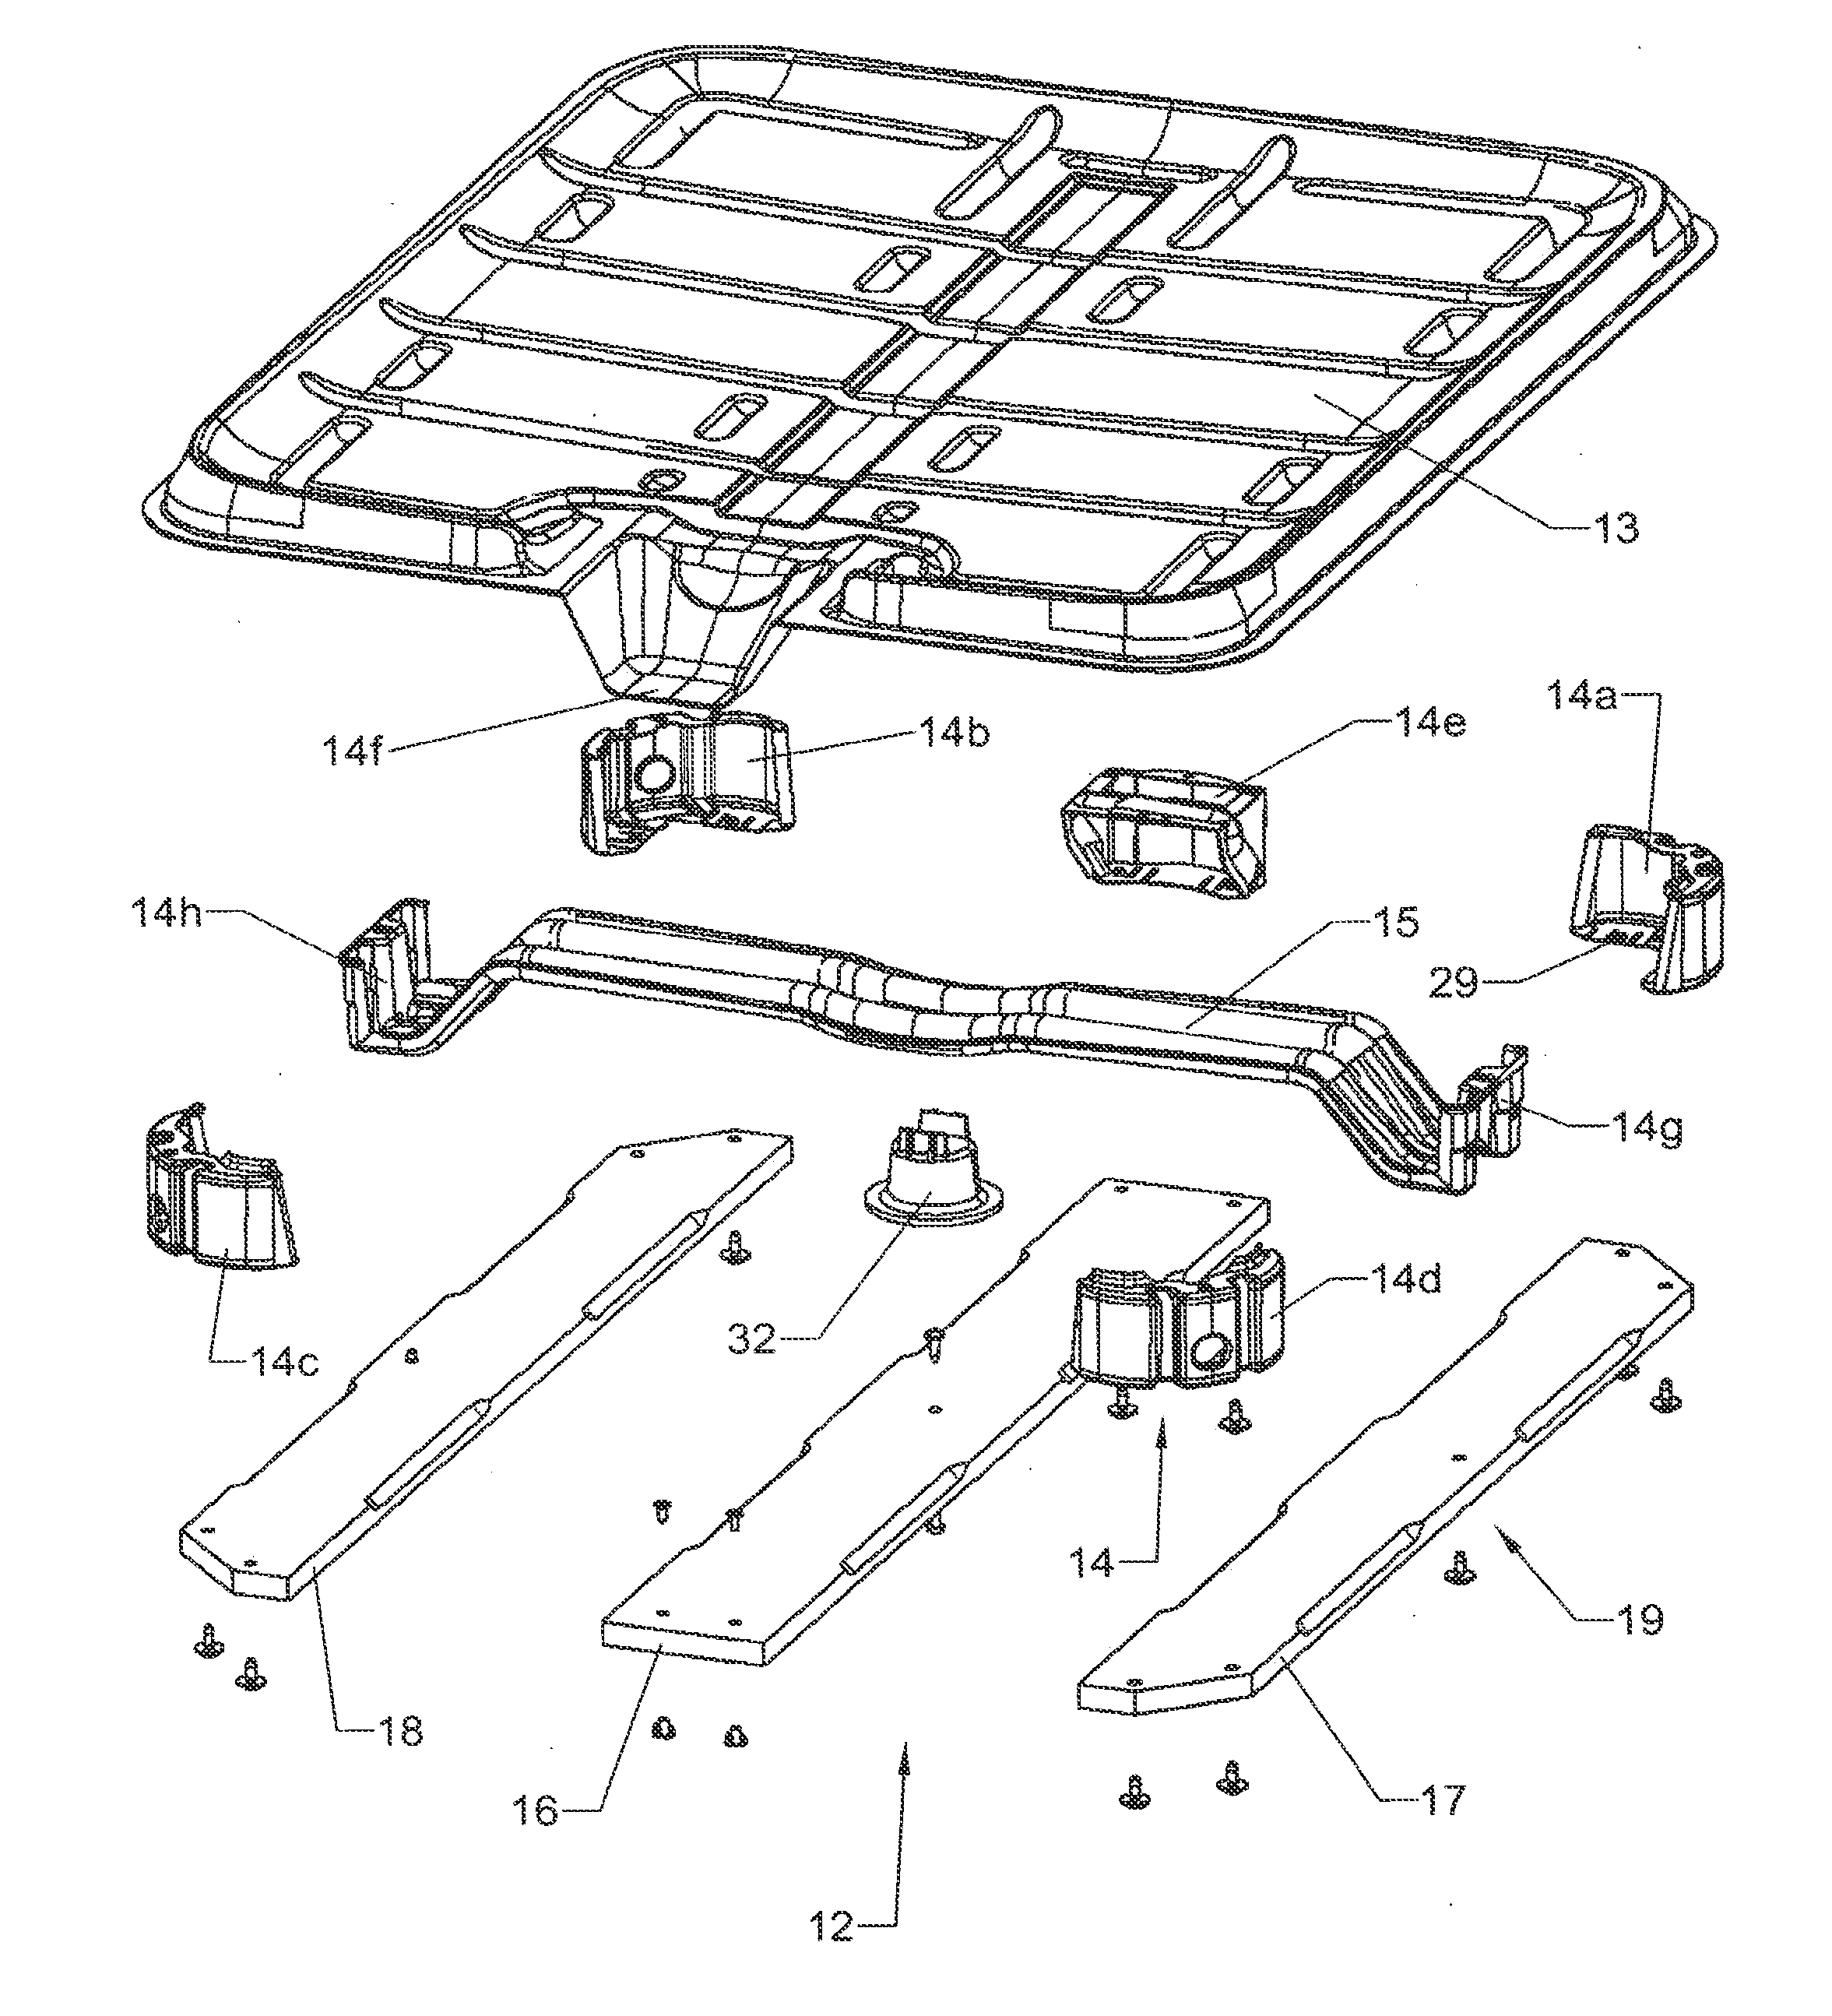 Pallet-like support base for transport and storage containers for liquids